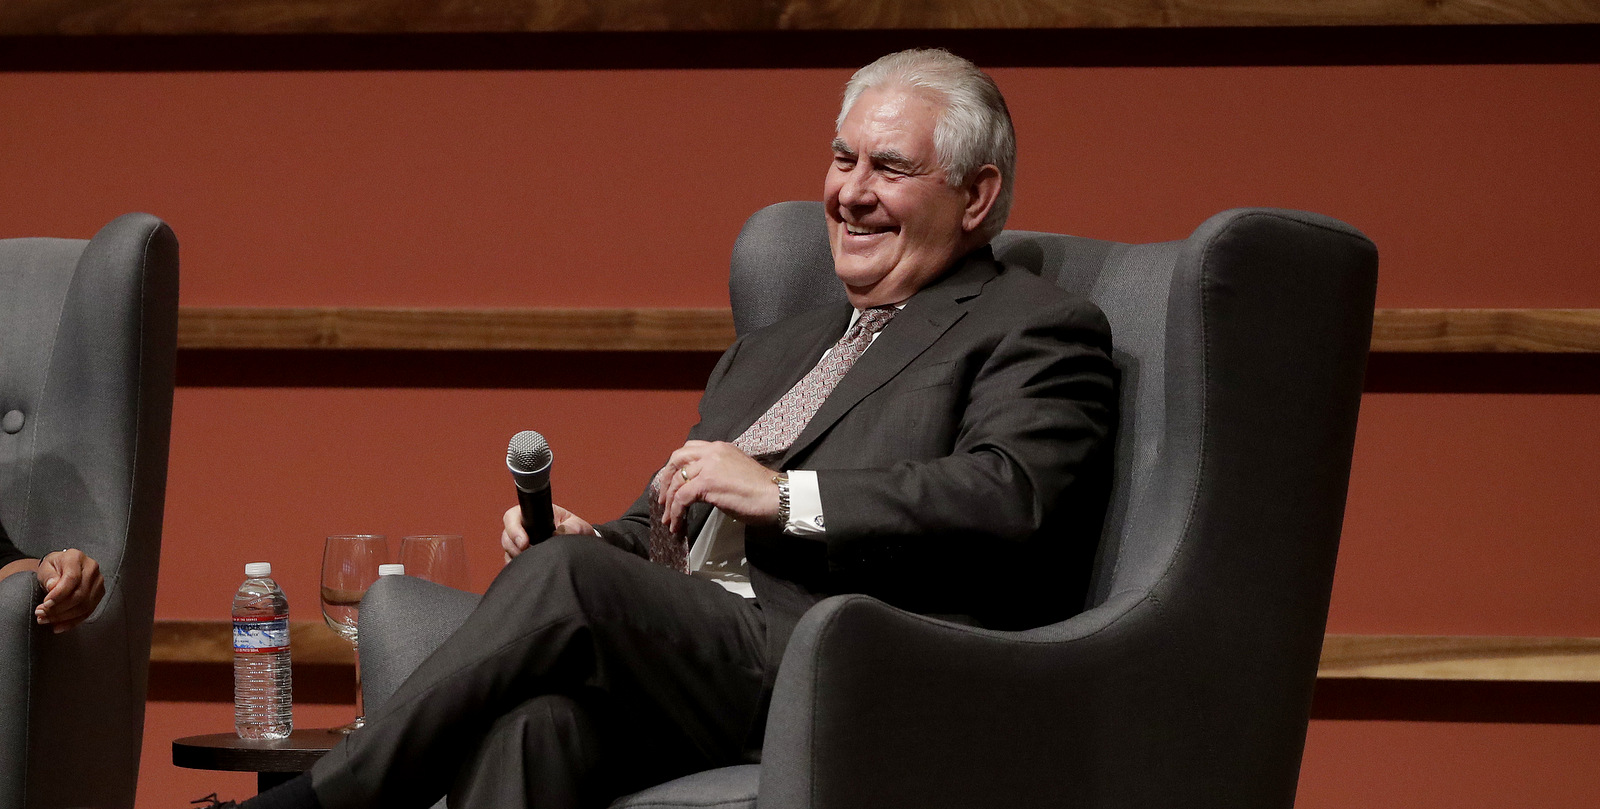 Secretary of State Rex Tillerson speaks to the Hoover Institution at Stanford University in Stanford, Calif., Jan. 17, 2018. (AP/Jeff Chiu)